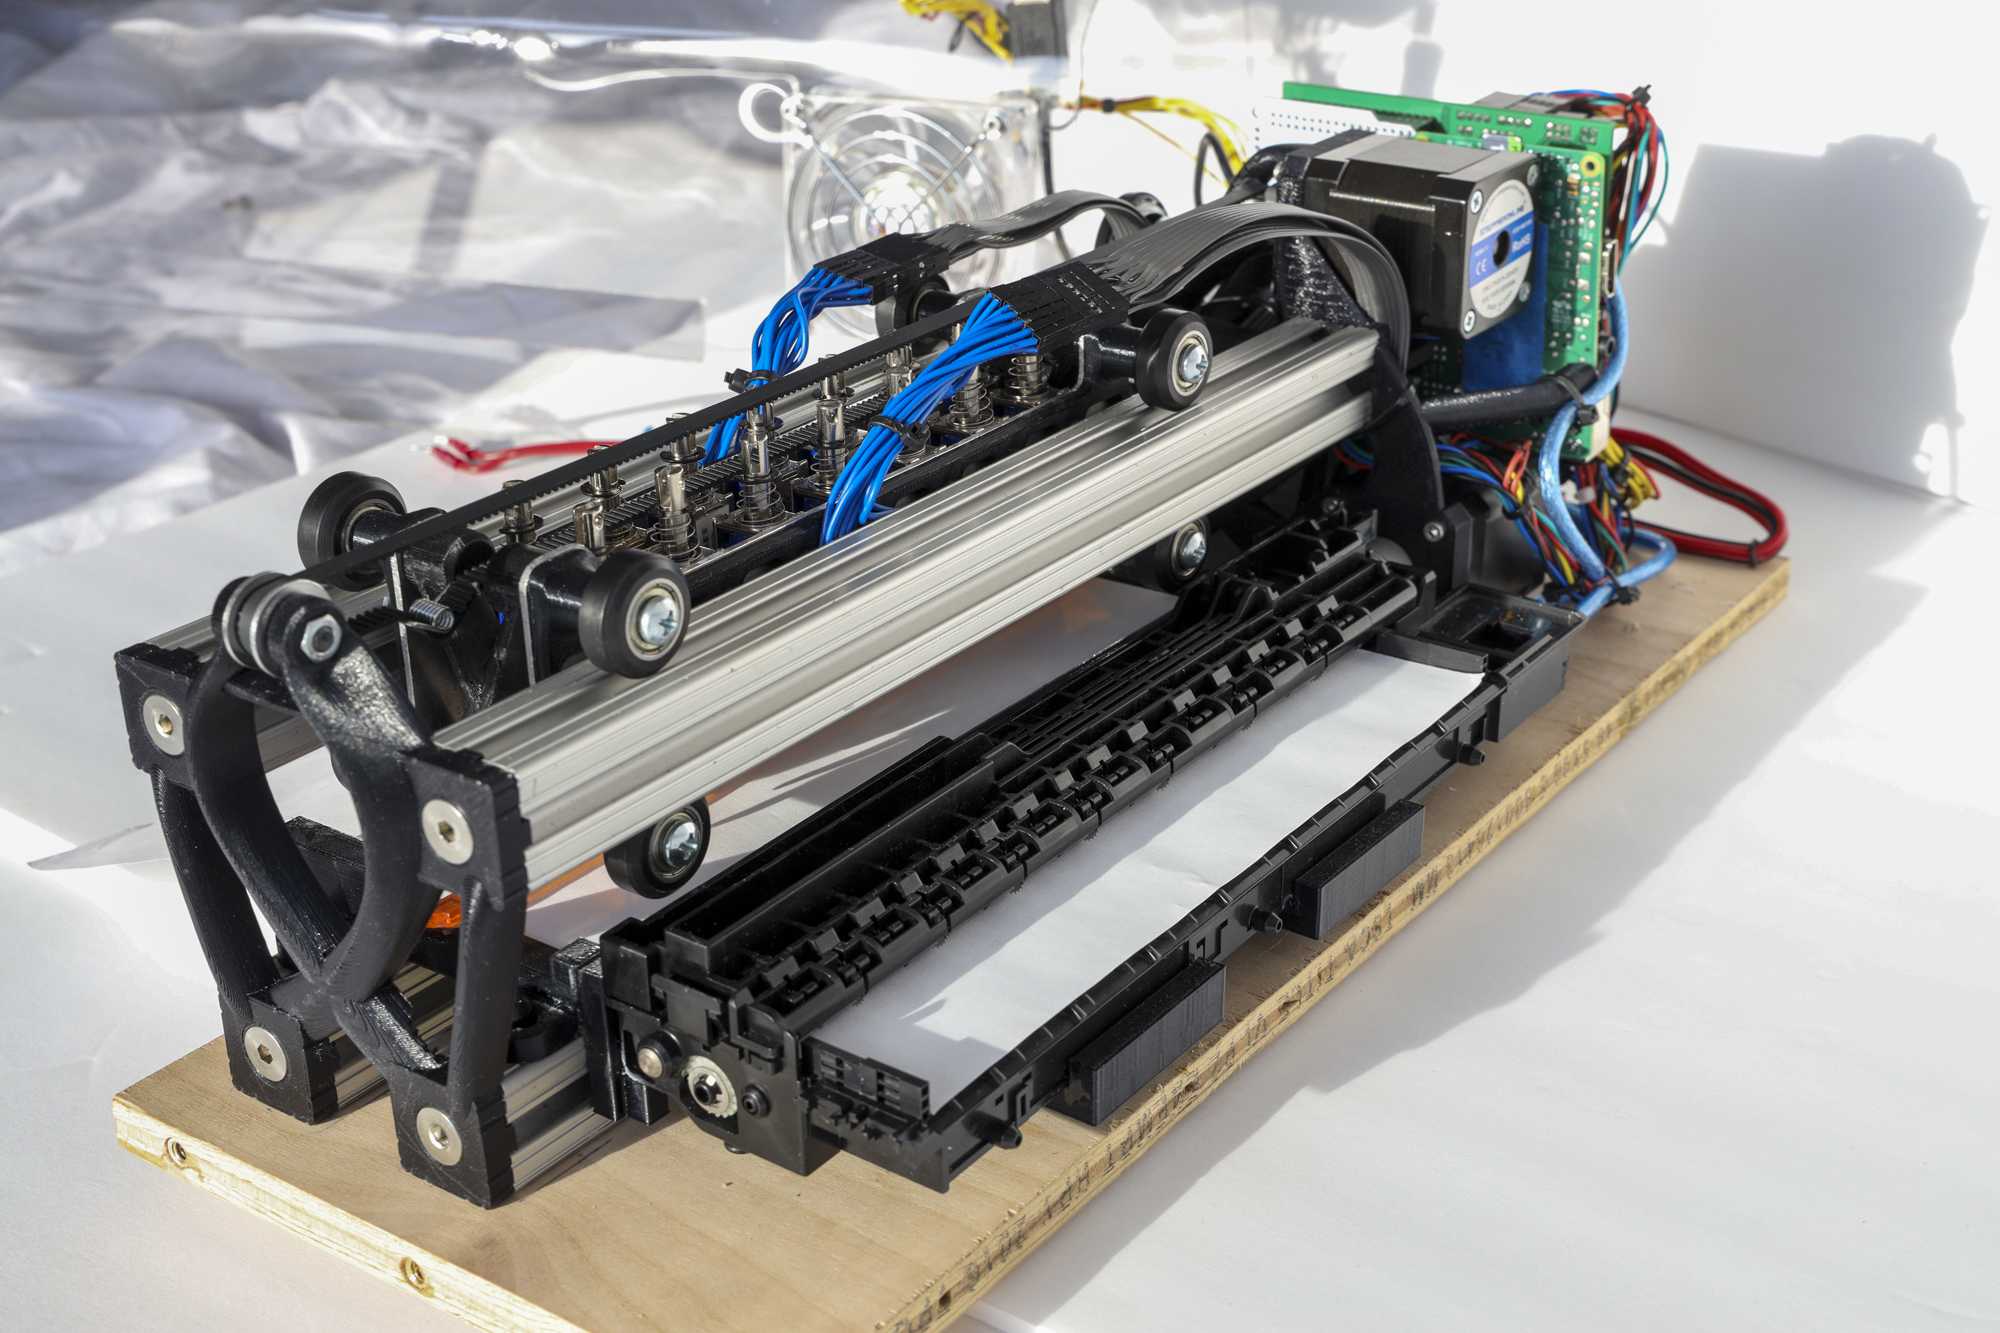 The Portabraille Printer without the outer enclosure